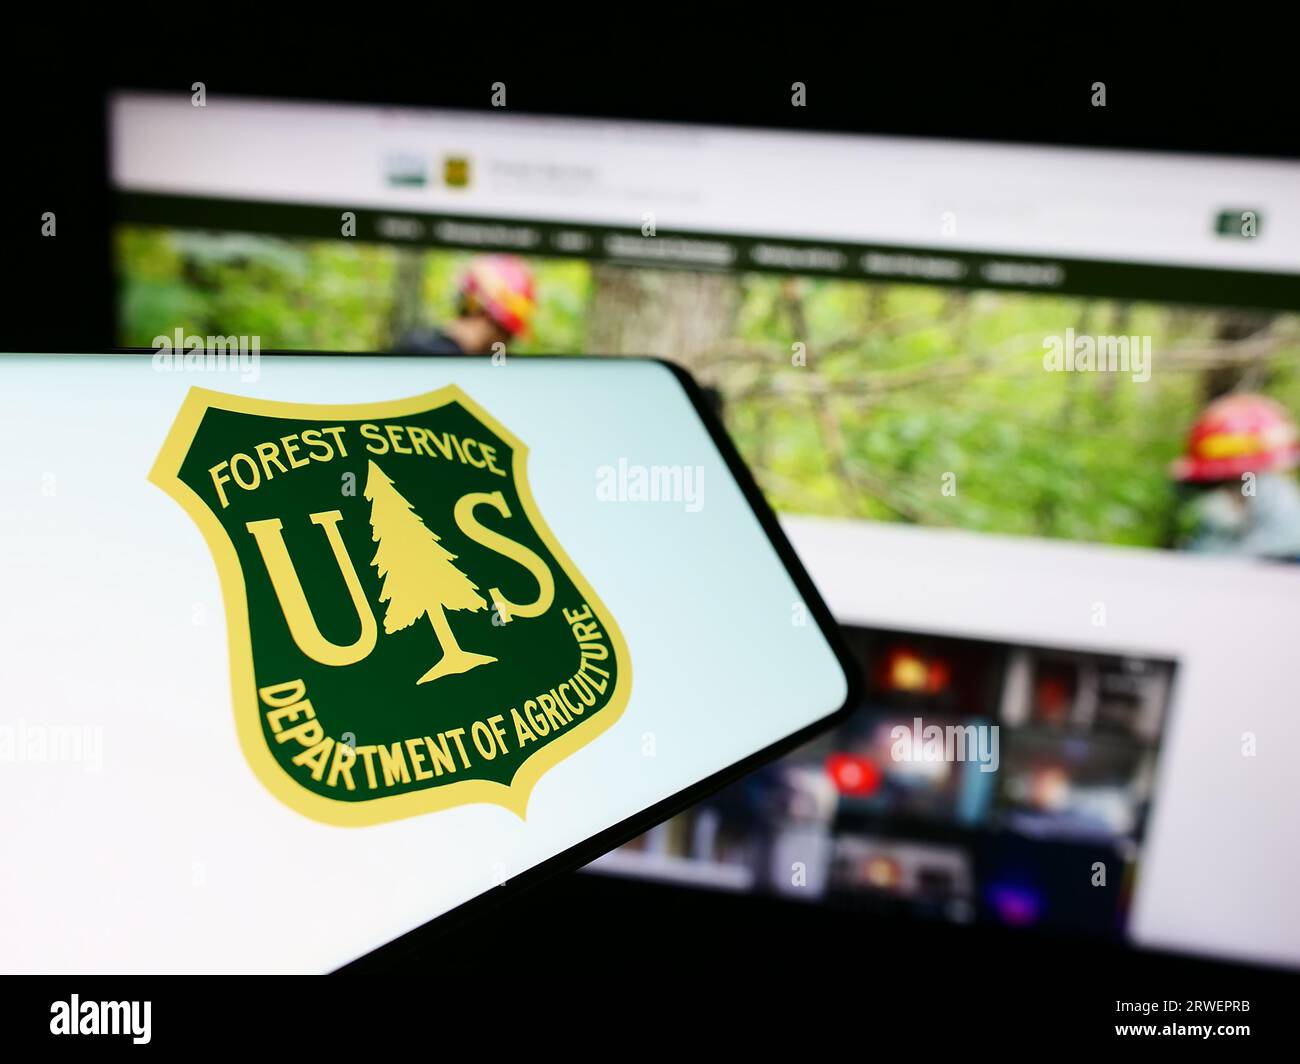 Smartphone with logo of United States Forest Service (USFS) on screen in front of website. Focus on center of phone display. Stock Photo